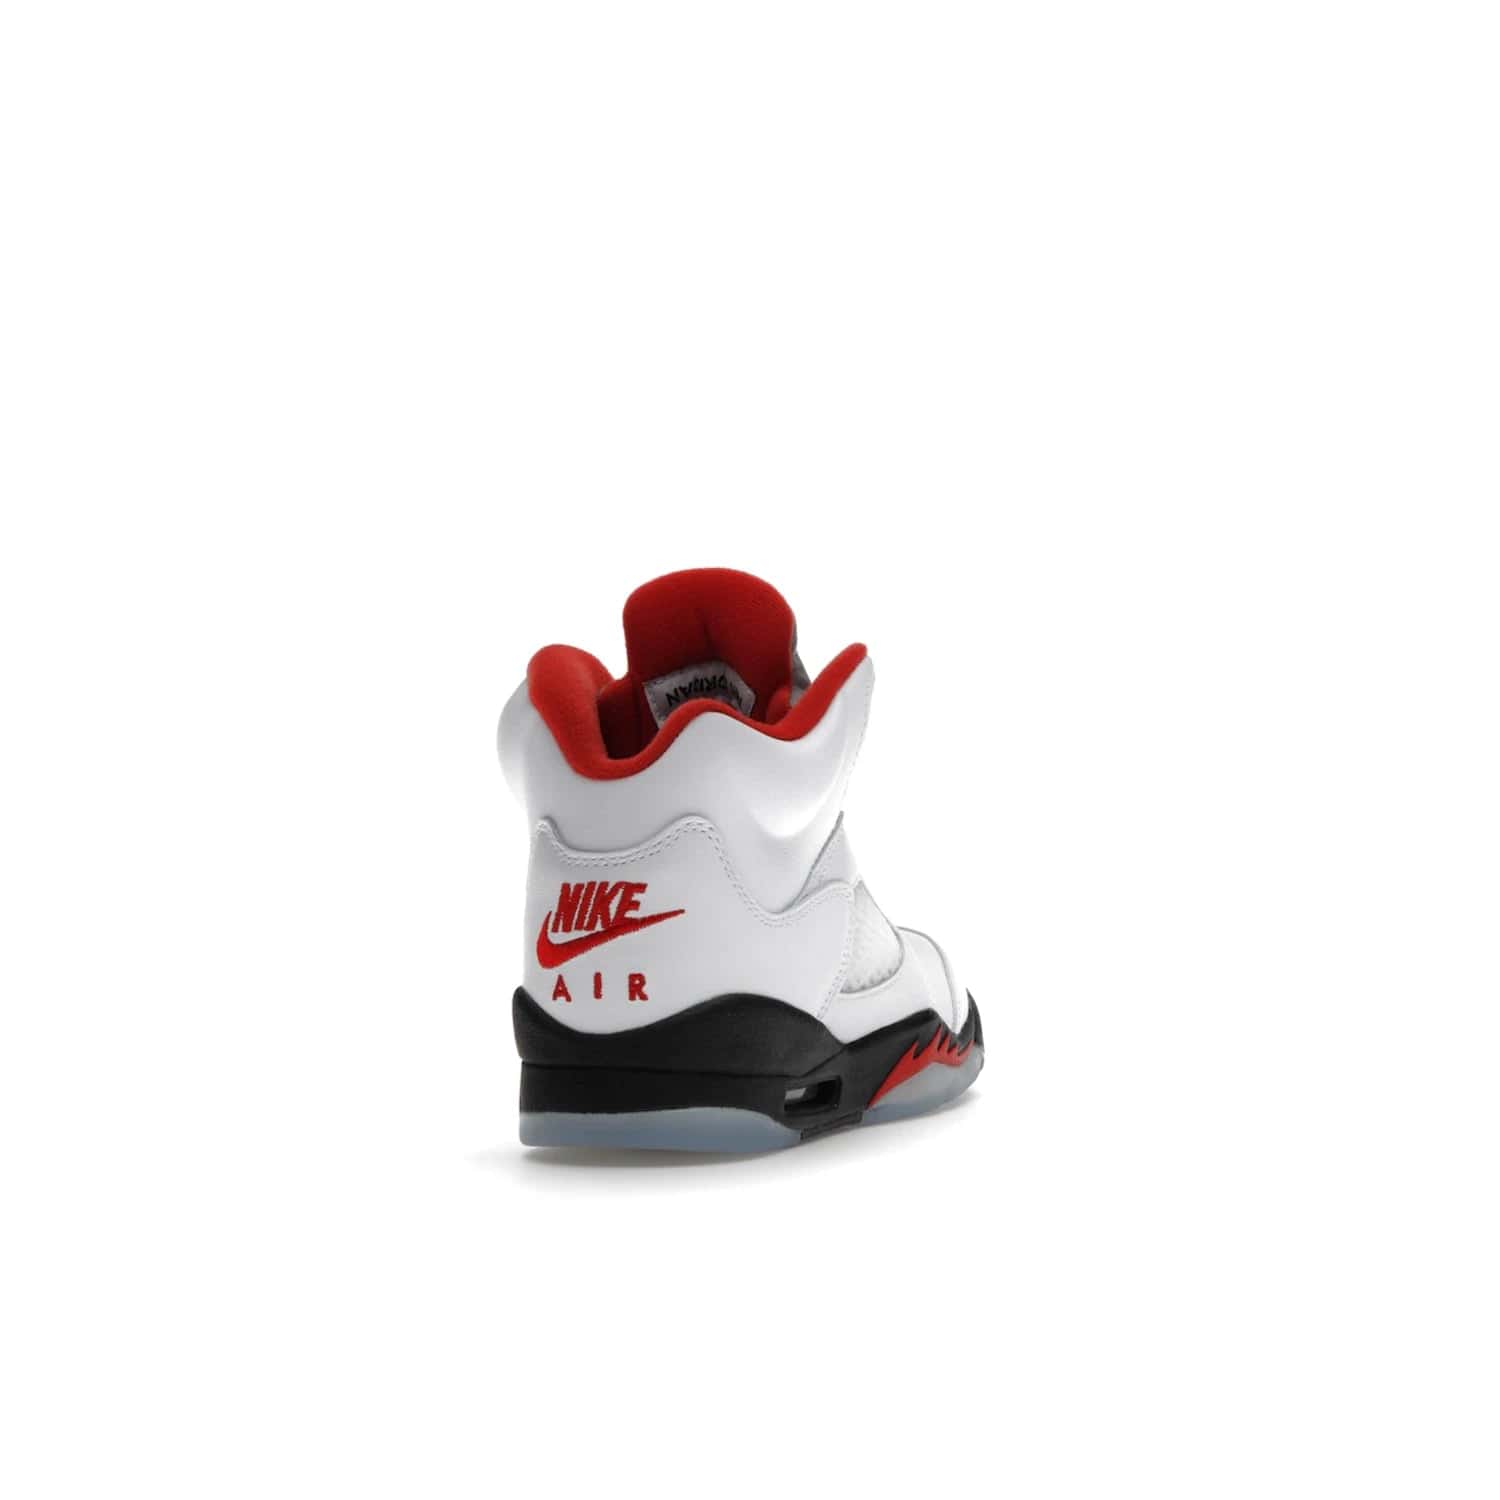 Jordan 5 Retro Fire Red Silver Tongue (2020) (GS) - Image 30 - Only at www.BallersClubKickz.com - A stylish option for any grade schooler. The Air Jordan 5 Retro Fire Red Silver Tongue 2020 GS features a combination of four hues, premium white leather, a clear mesh mid-upper and a reflective silver tongue. An icy translucent blue outsole completes the look. Available on May 2, $150.